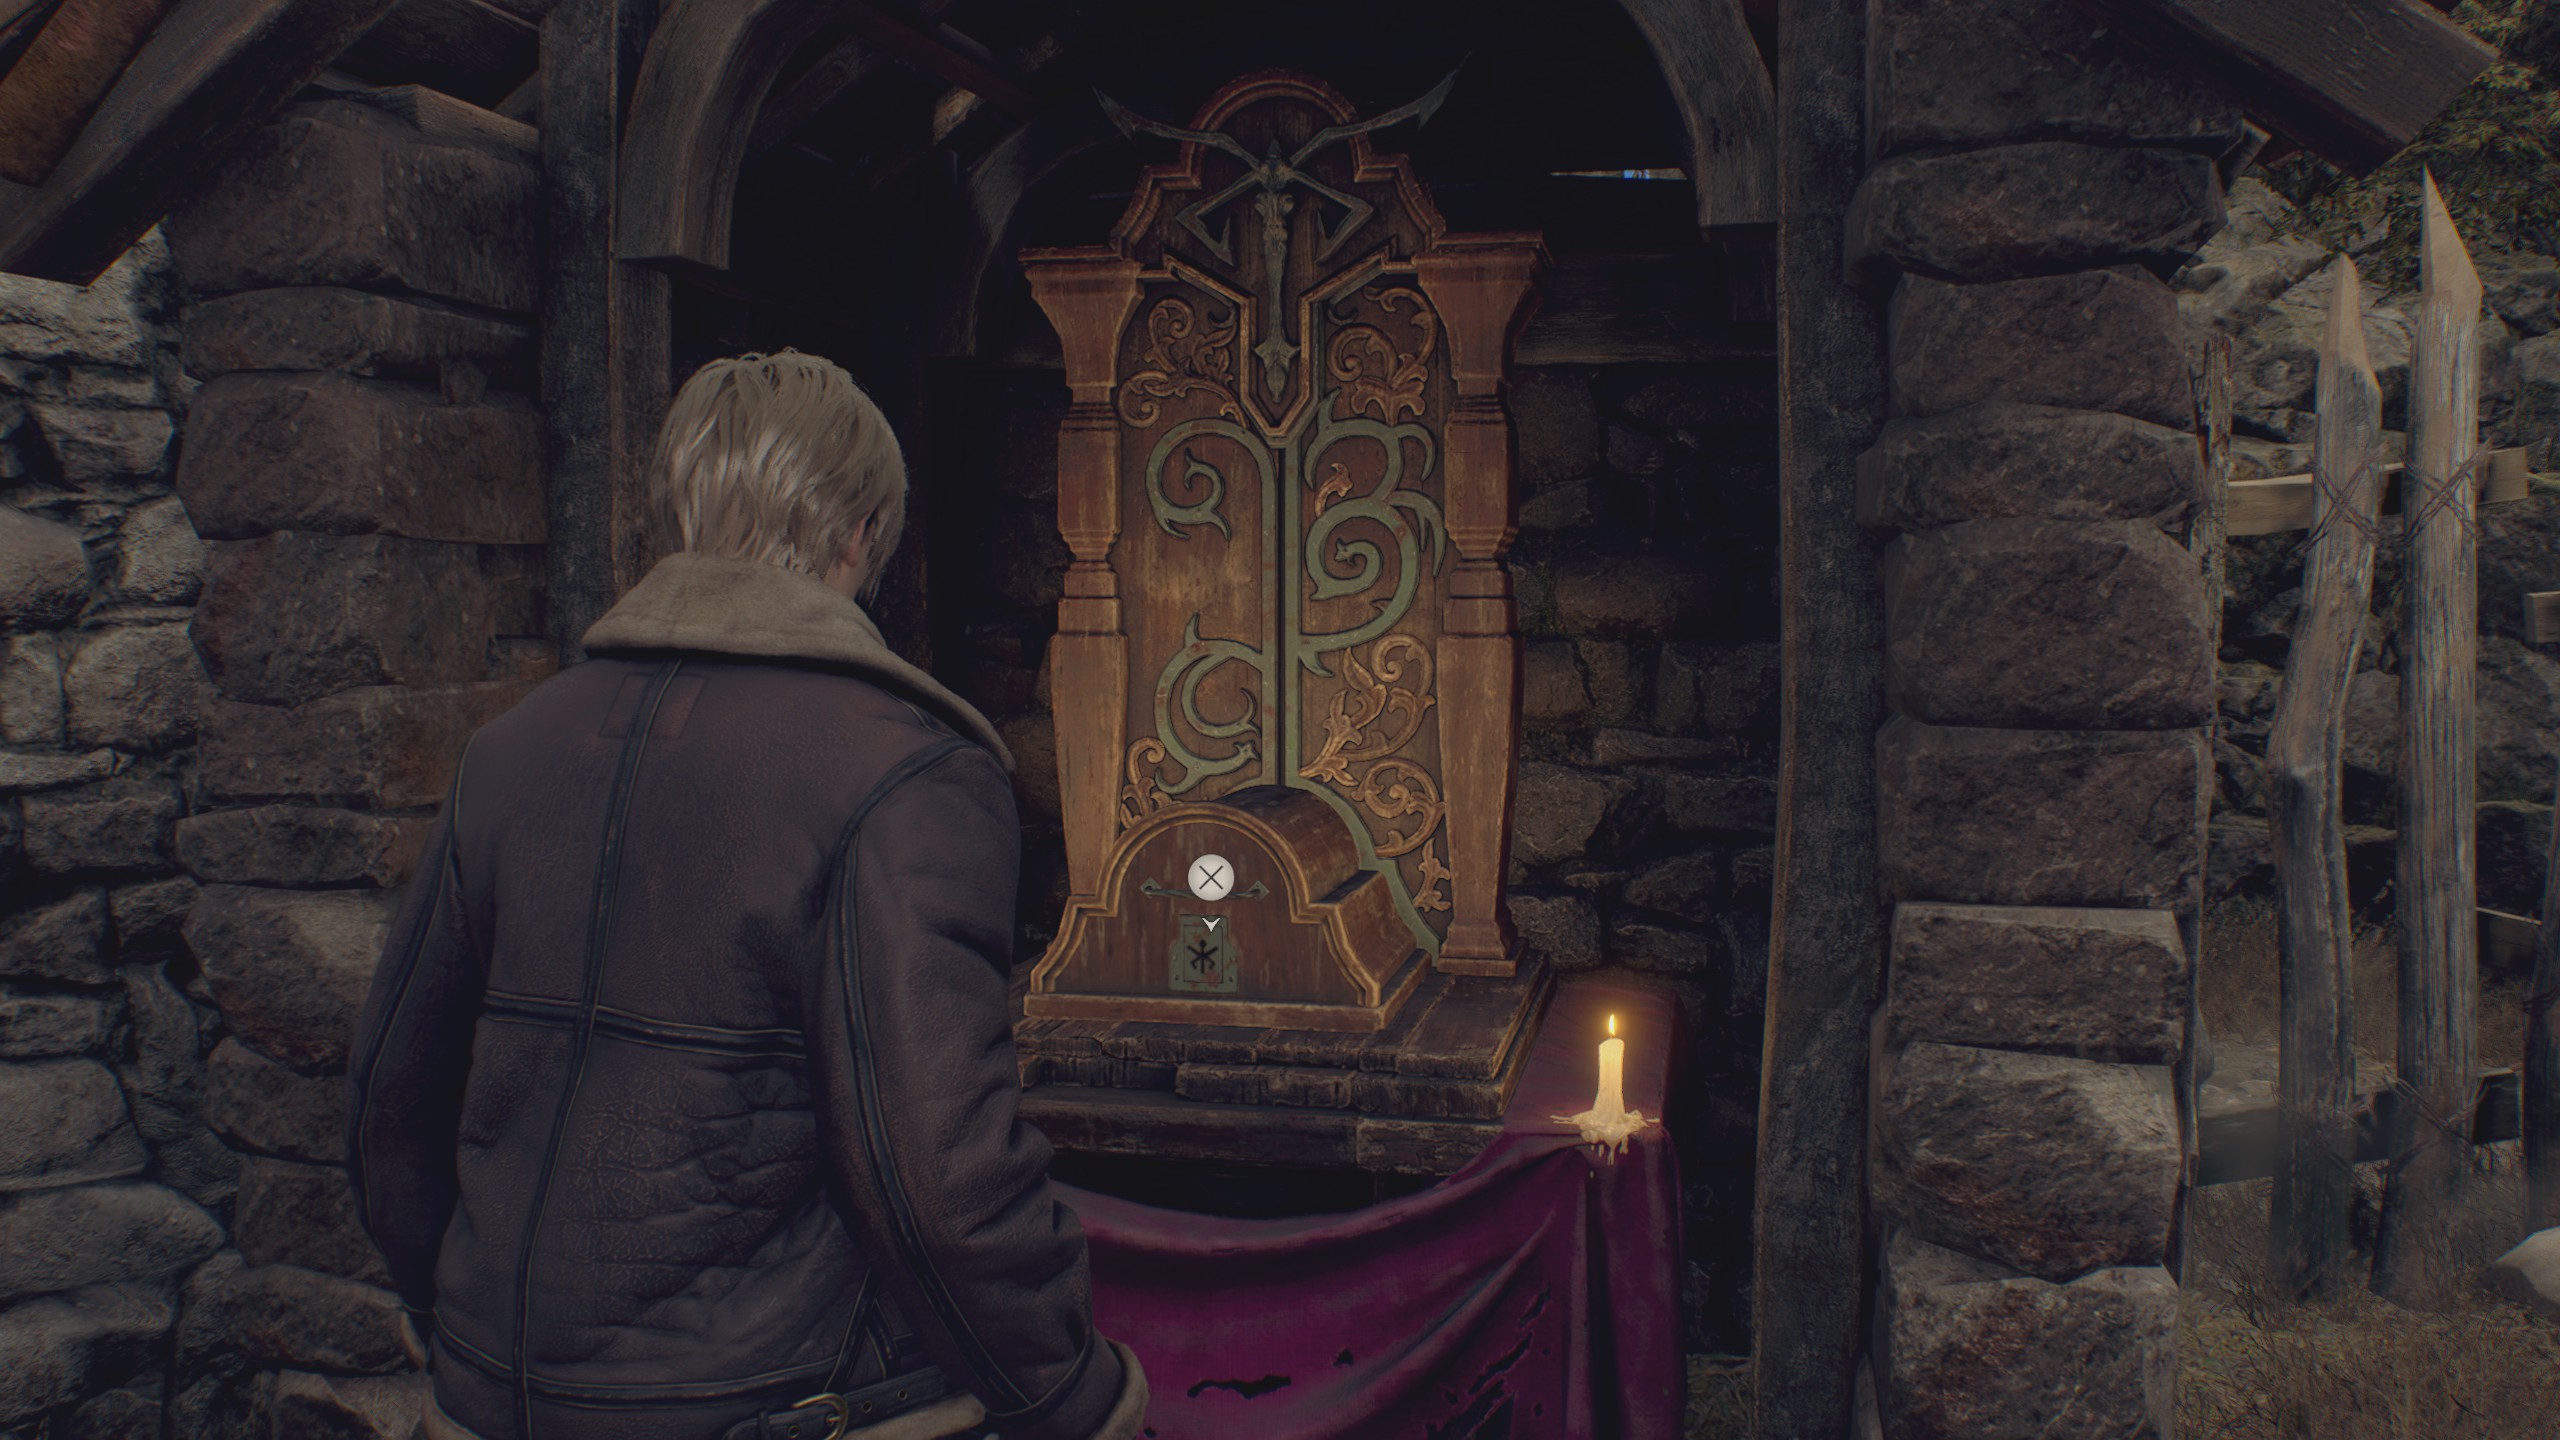 Where to find the Wayshrine key in Resident Evil 4 Remake